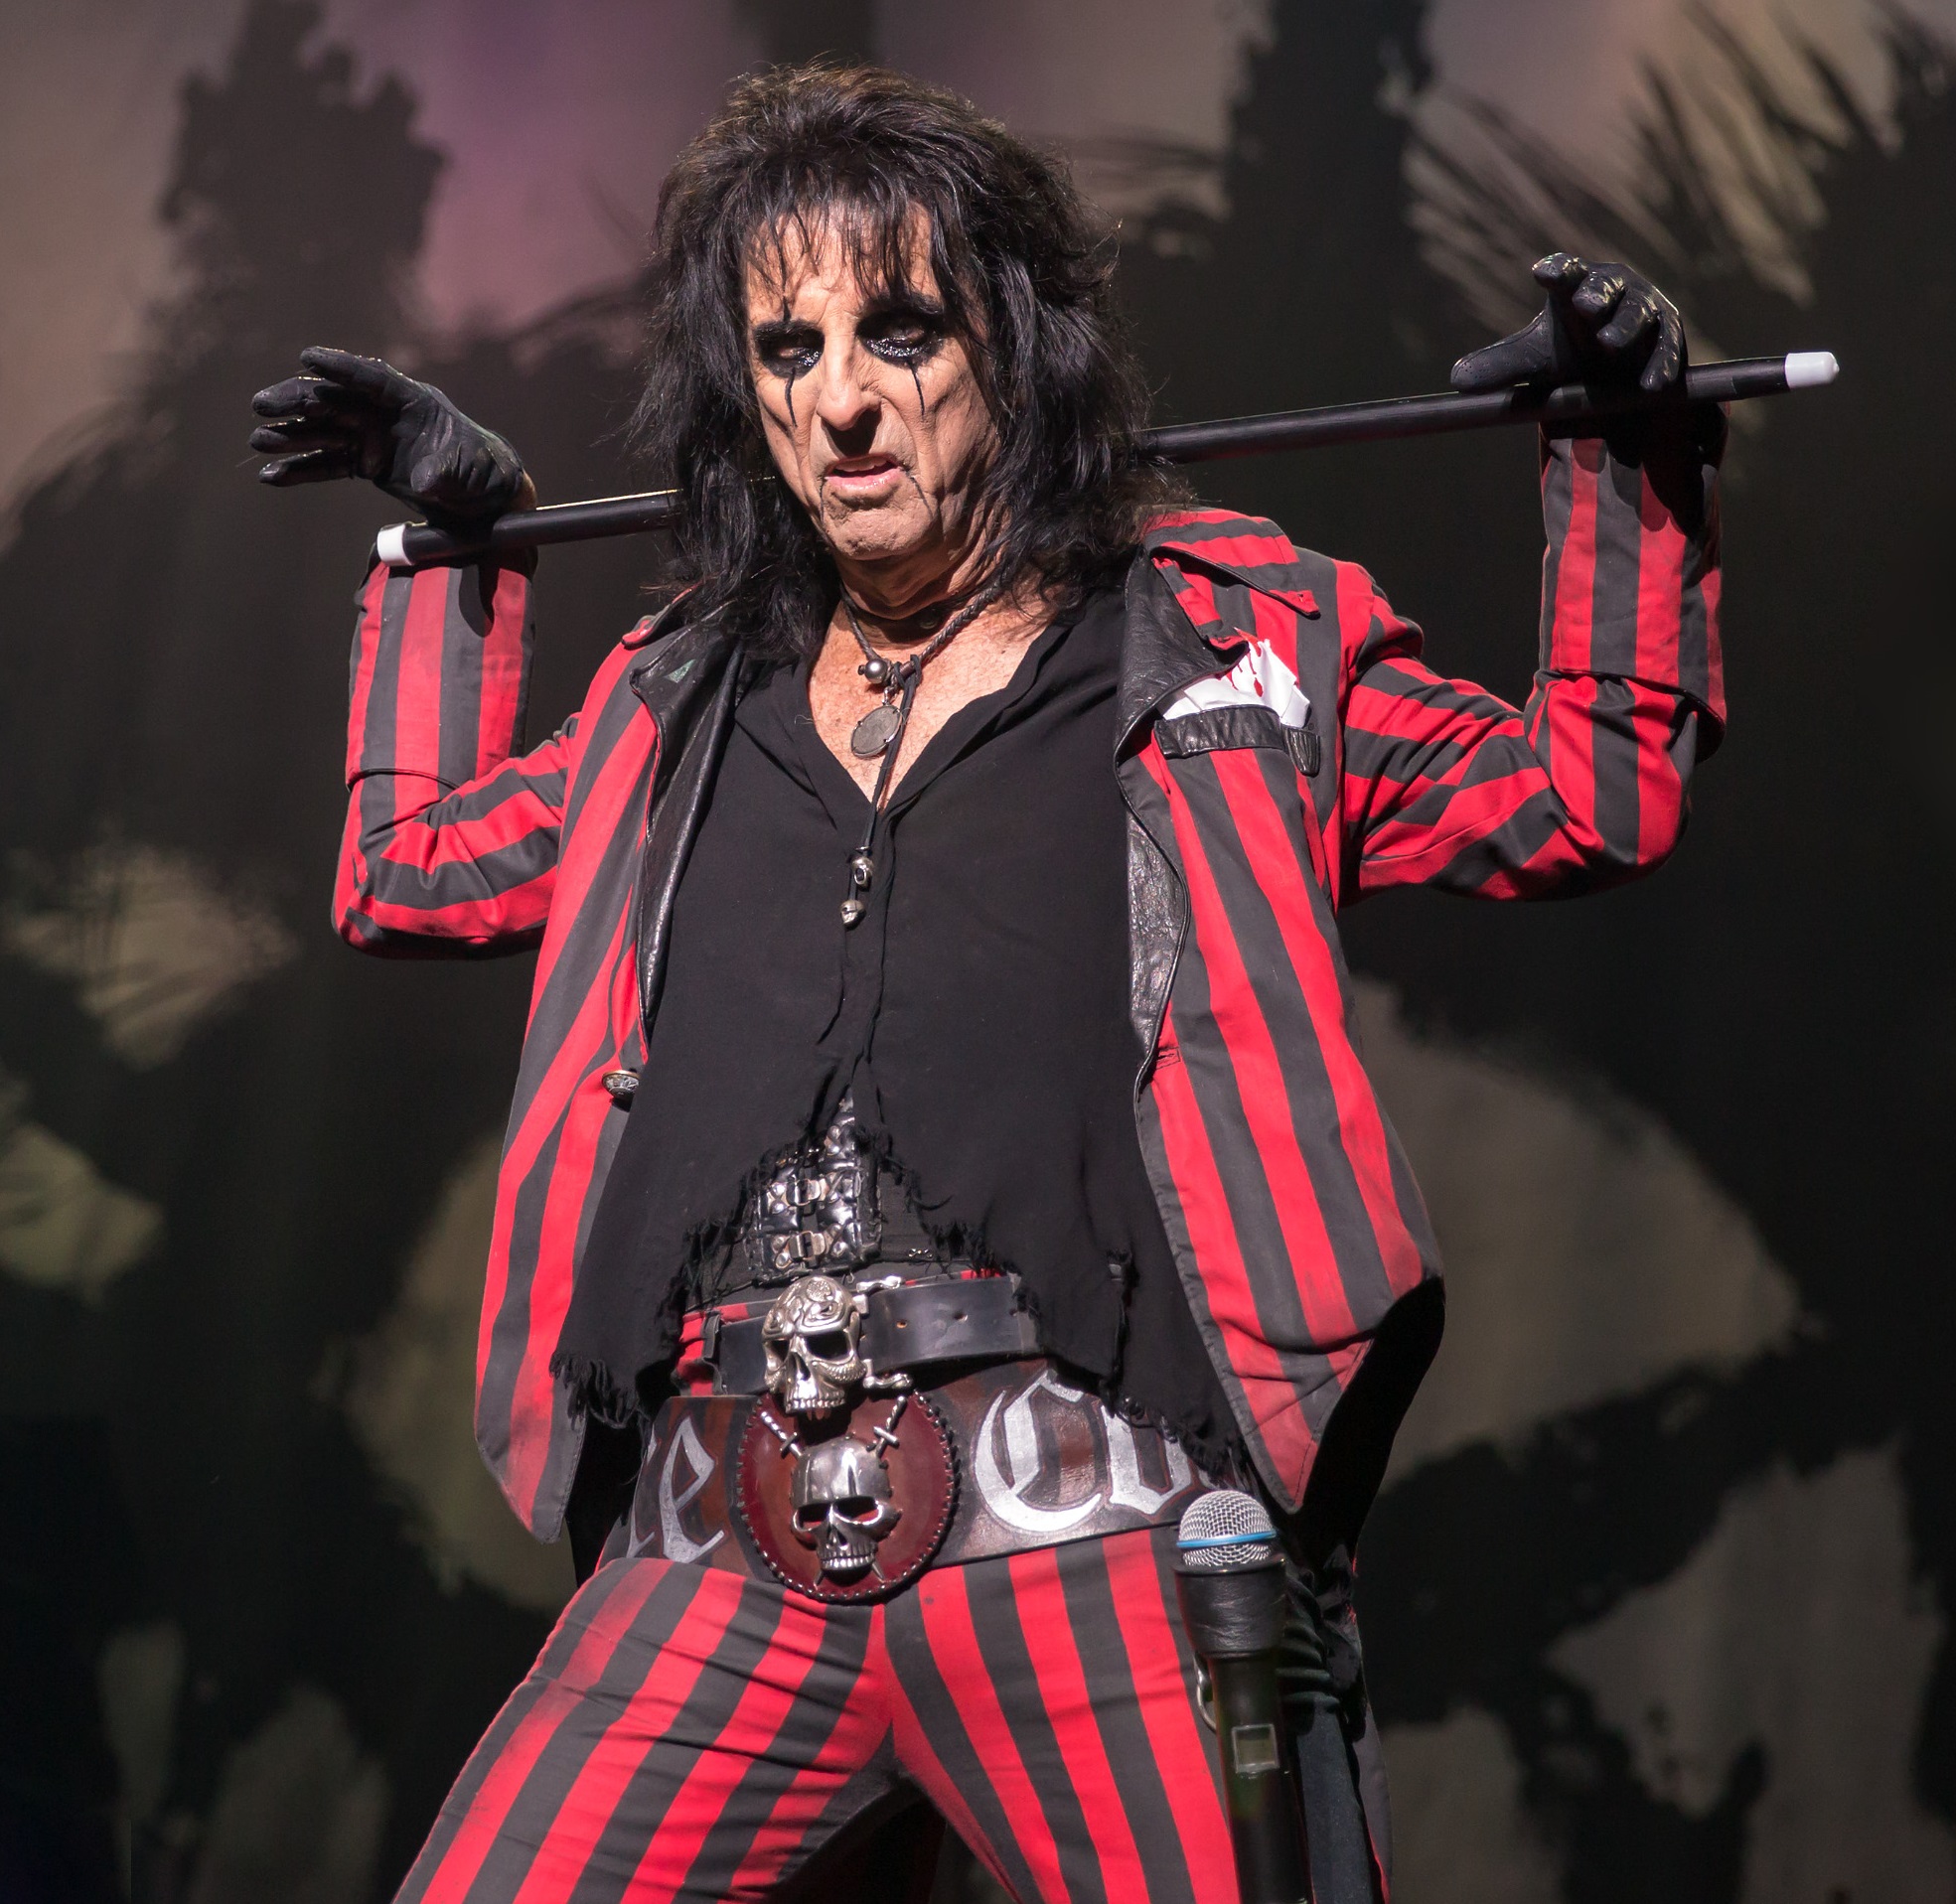 Alice Cooper And Rocco Mediate To Host A New Golf Show On SiriusXM